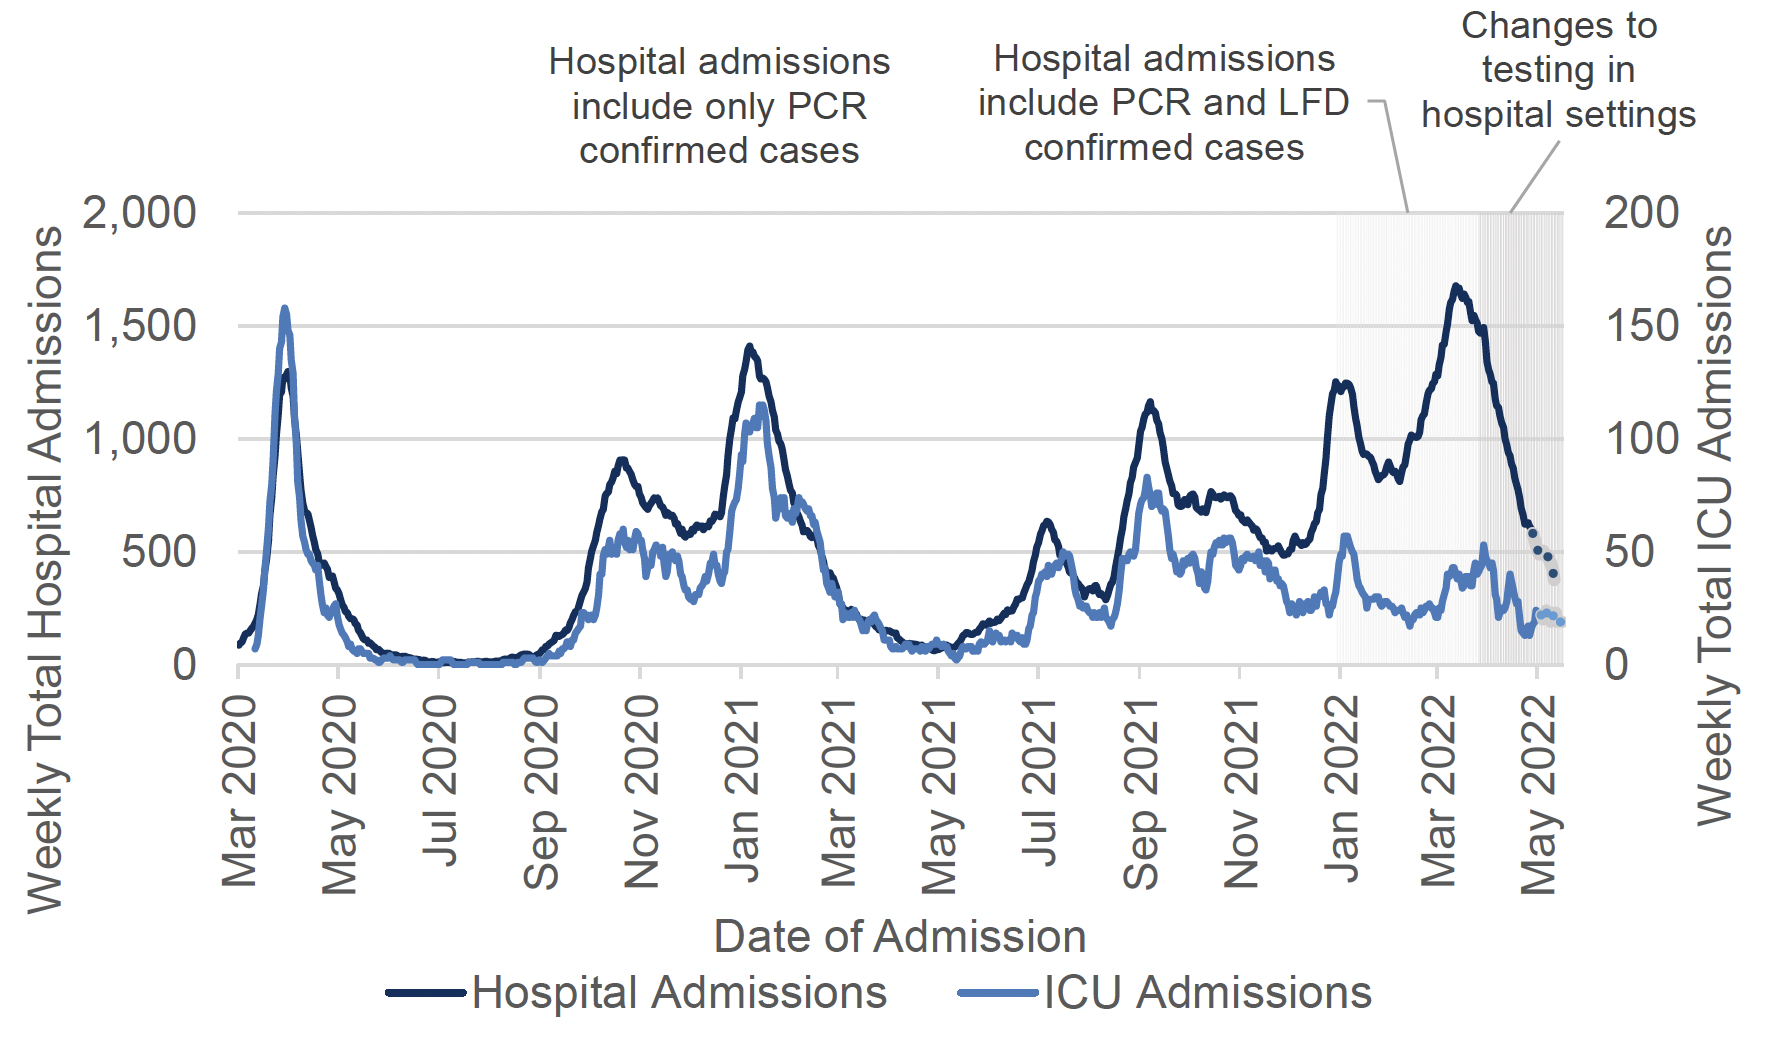 A line chart showing the total weekly number of hospital admissions with recently confirmed Covid-19 from March 2020 to May 2022, against the left axis, and the weekly number of ICU admissions against the right axis. Both hospital and ICU admissions peaked in March 2020, October 2020, January 2021, July 2021, September 2021, January 2022, and March 2022 for hospital admissions and early April 2022 for ICU admissions. Last two weeks’ trend line is a dotted line due to data uncertainty. The chart has notes explaining that: Before 5 January 2022, hospital admissions were only included if the patient had a recent positive laboratory confirmed PCR test. After 5 January, both LFD and PCR confirmed cases were included. ICU admissions rely on PCR testing only. Patient testing requirements changed on 1 April 2022, which will mean a reduction in asymptomatic cases of Covid detected and a corresponding decrease in ascertained Covid-19 related occupancy and admissions. In addition, from 1 May 2022, testing changed from asymptomatic population-wide testing, to targeted testing for clinical care and surveillance. Therefore data should be interpreted with caution and over time comparison should be avoided. 